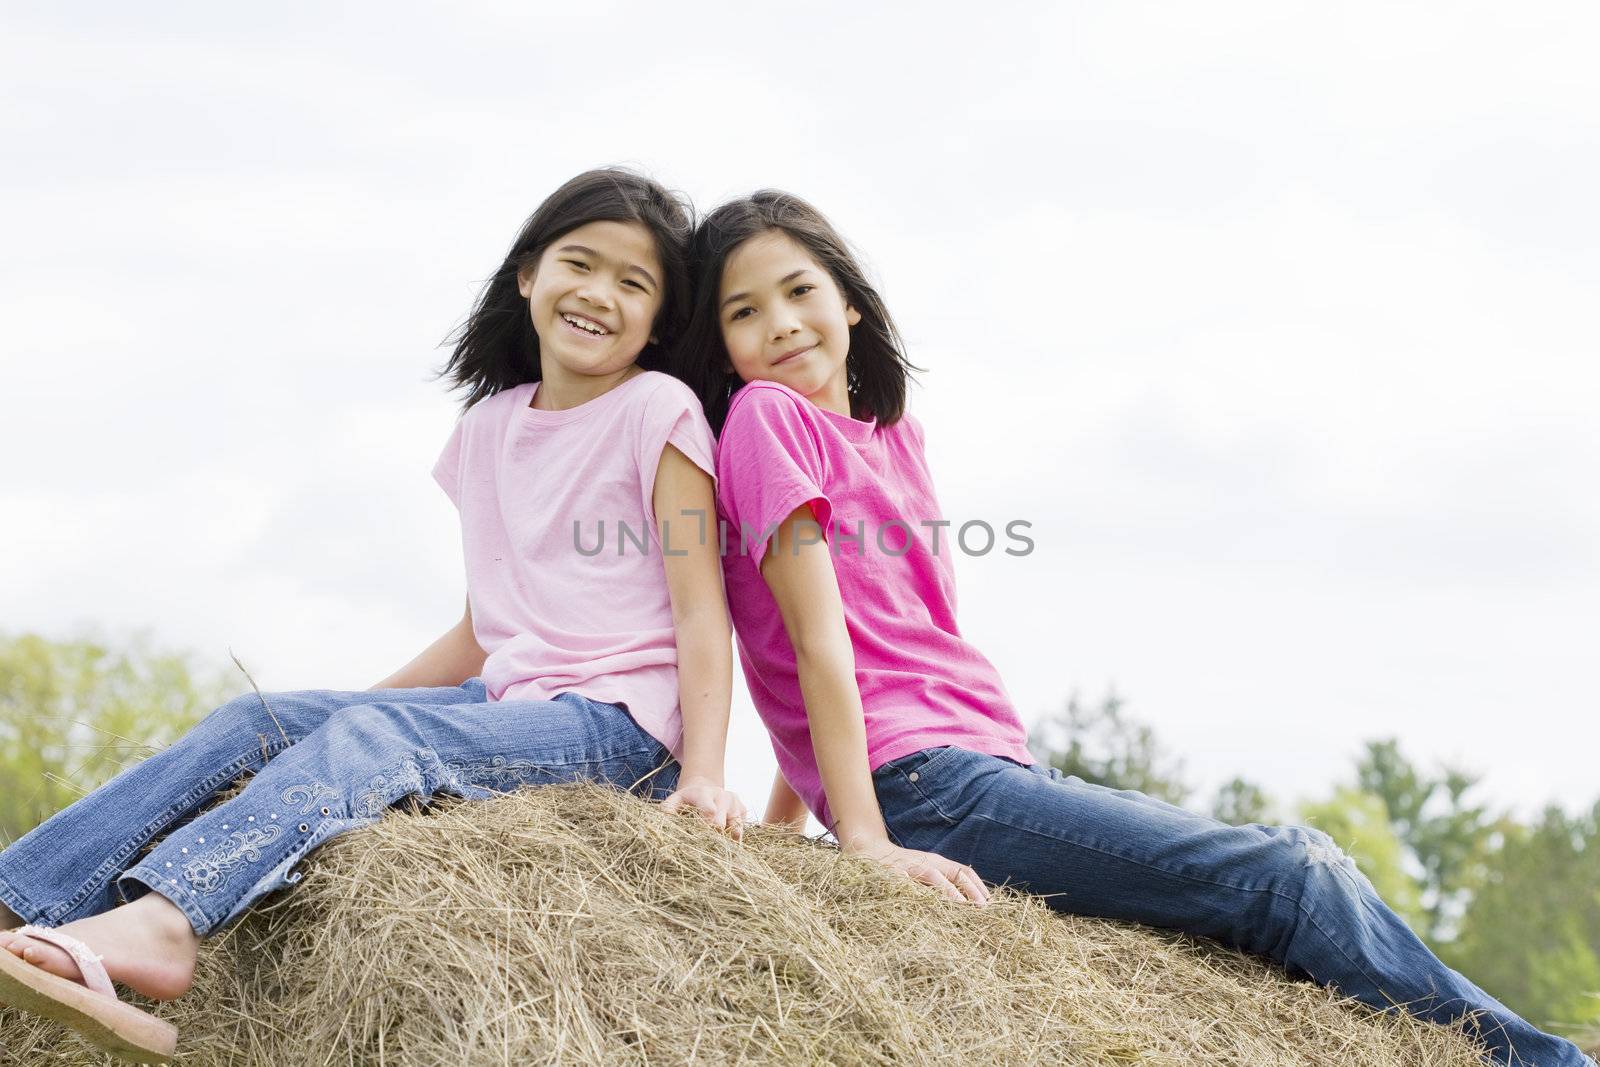 two young girls sitting on top of haybale by jarenwicklund